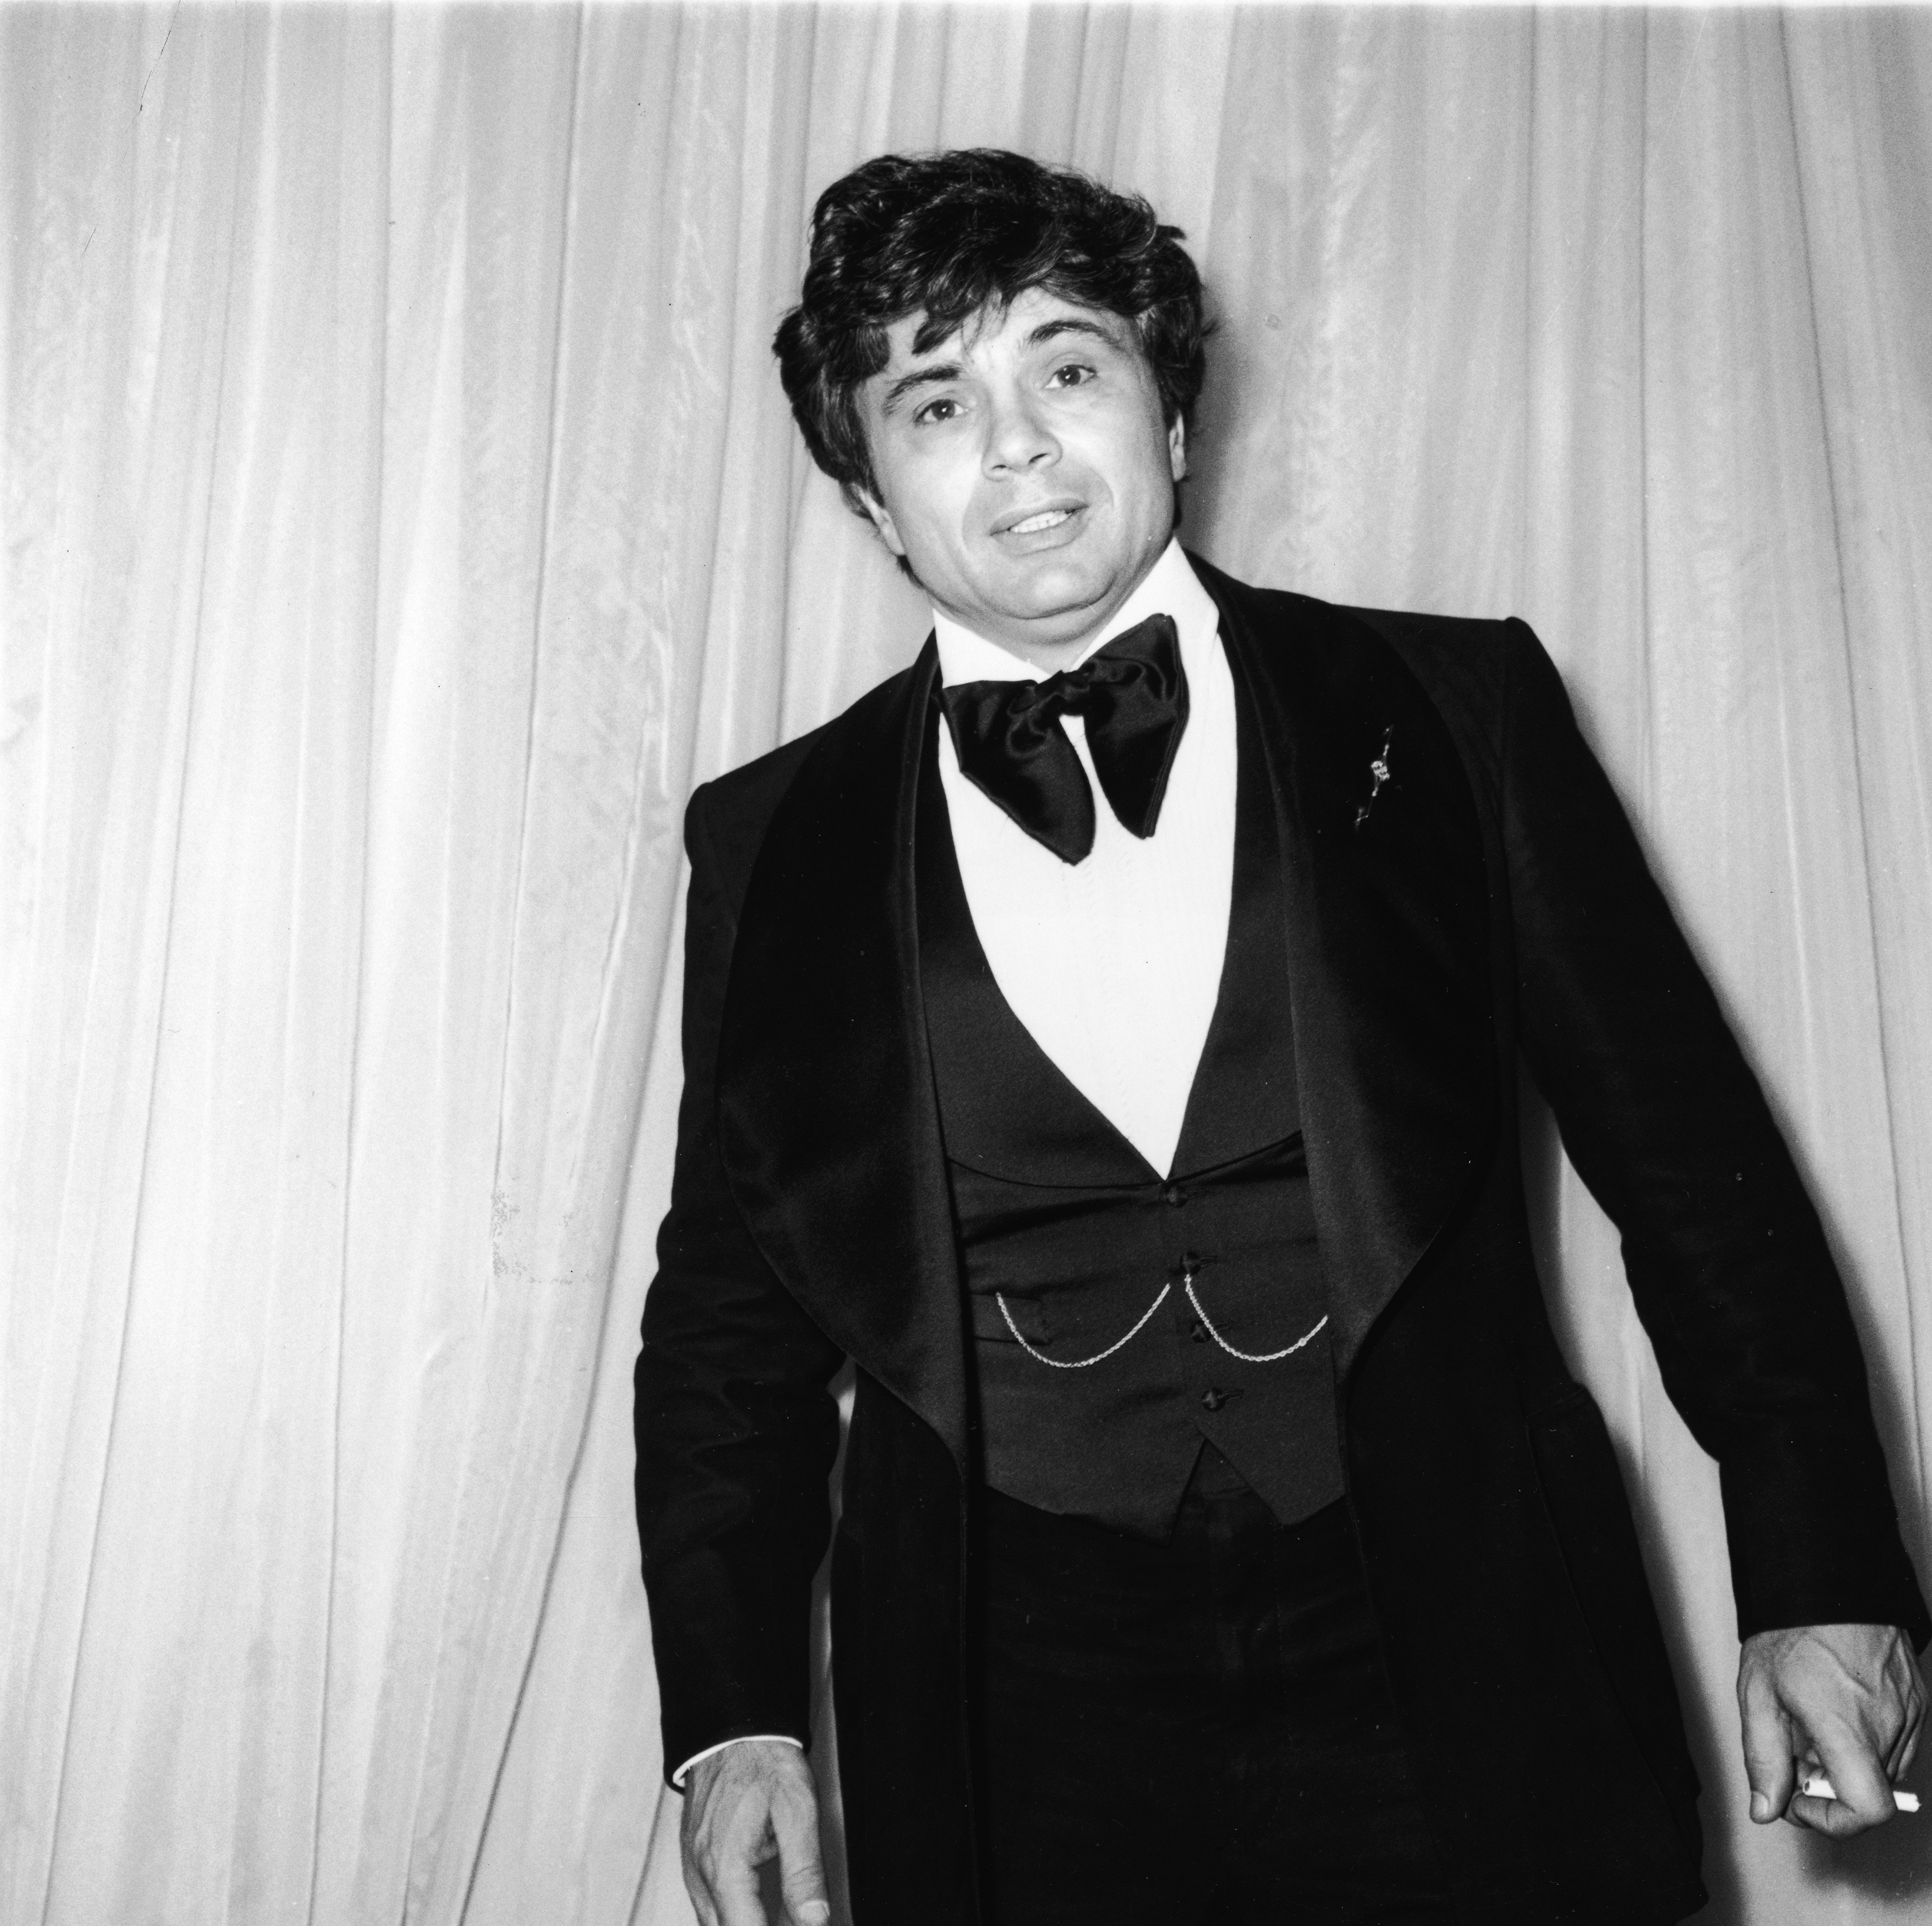 American actor Robert Blake stands at the Emmy Awards holding a cigarette in Hollywood, California in 1975 | Source: Getty Images